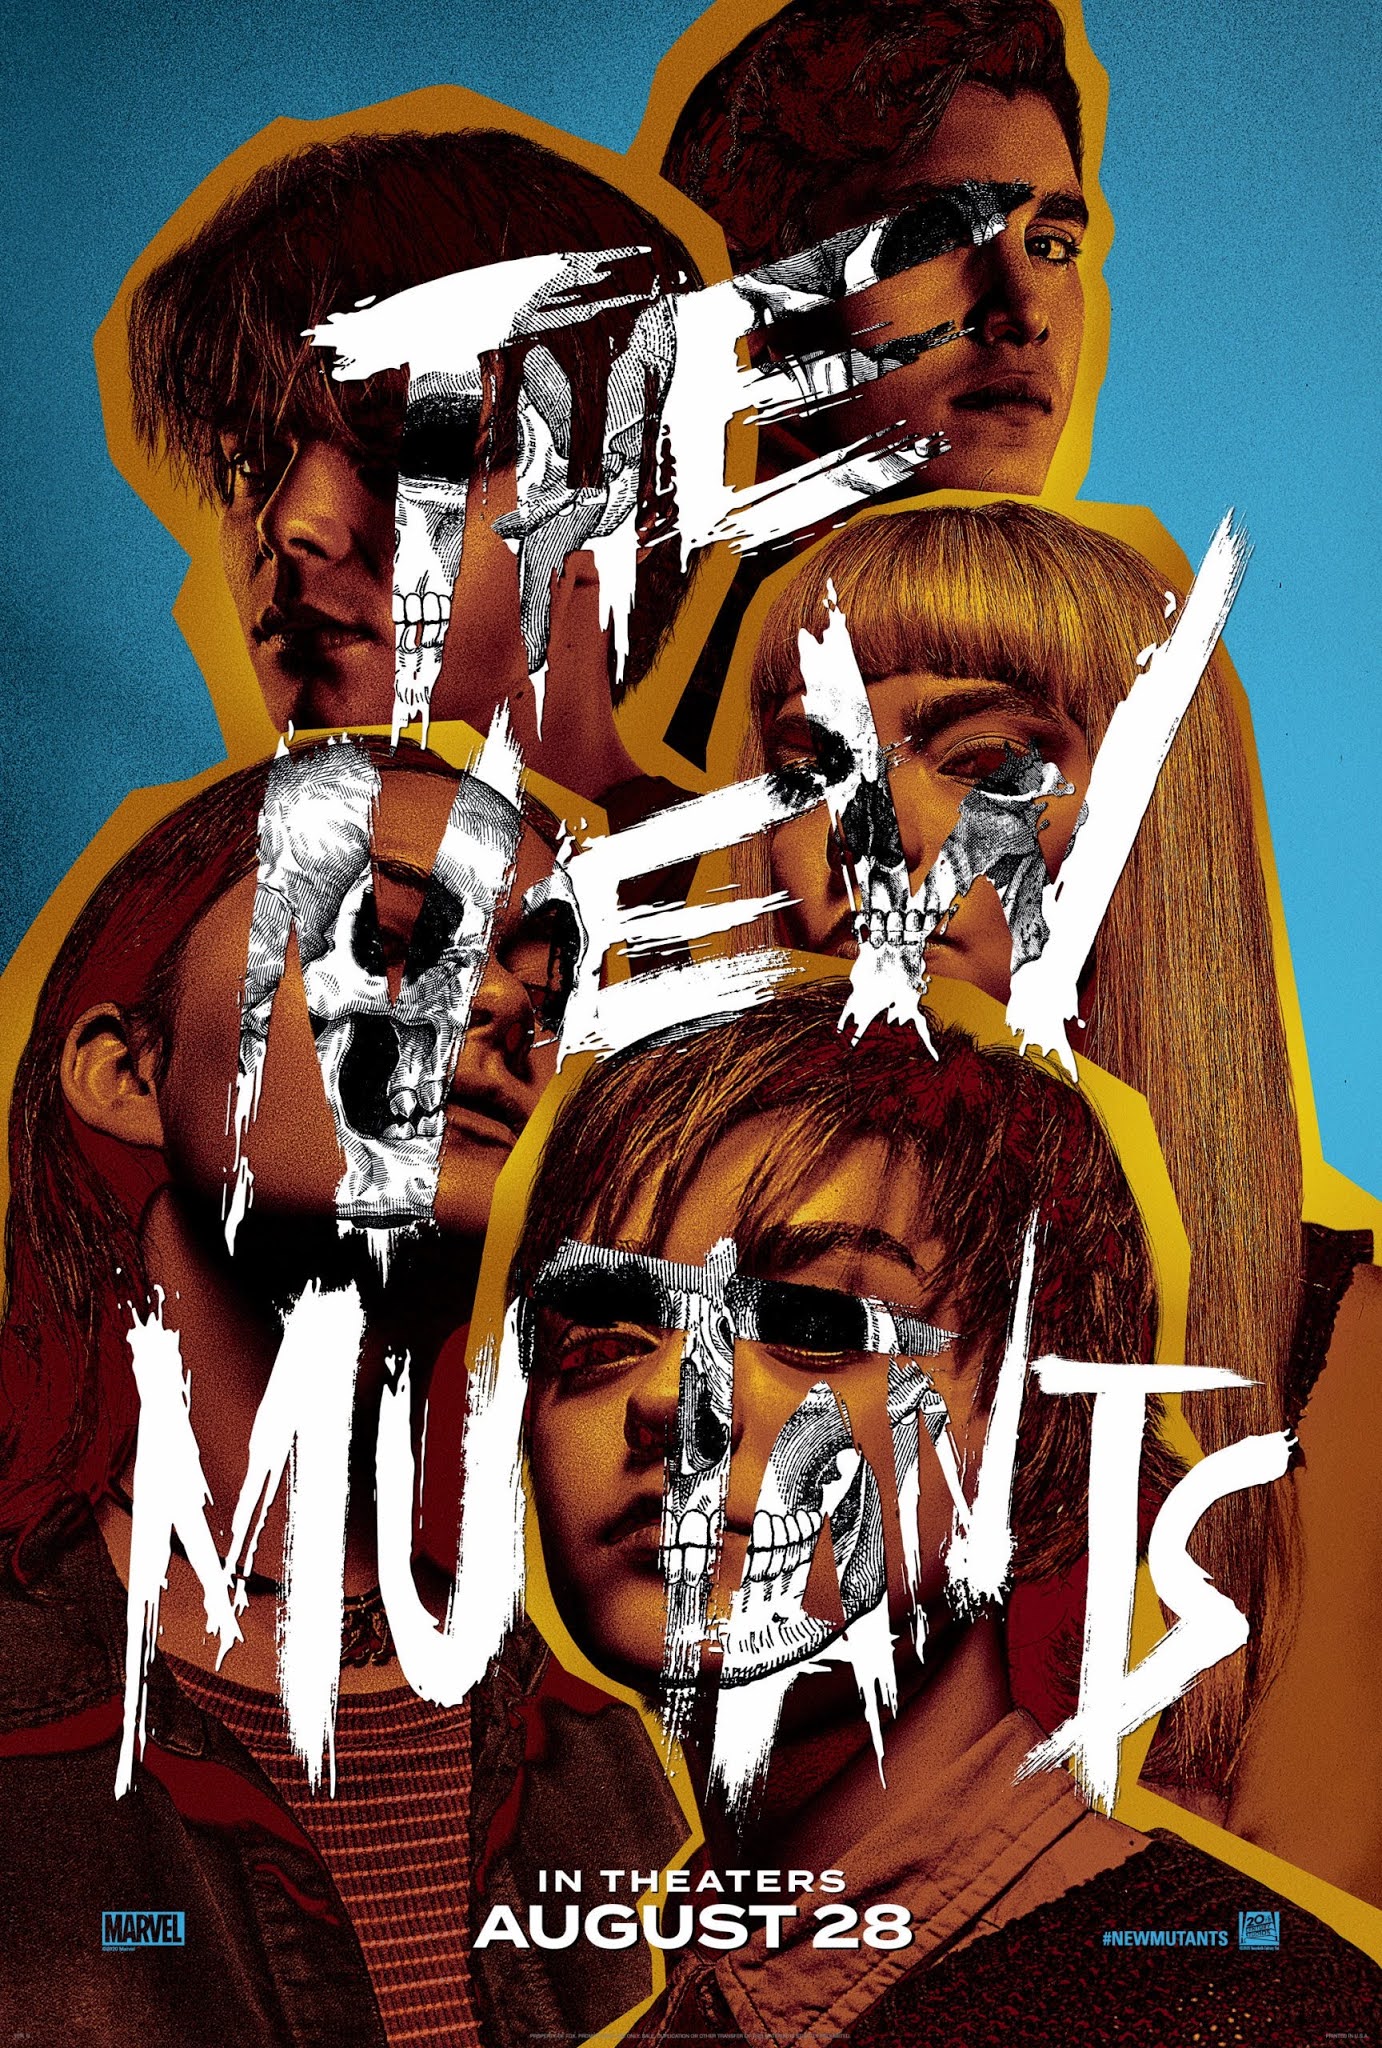 The New Mutants 2020 Film Review